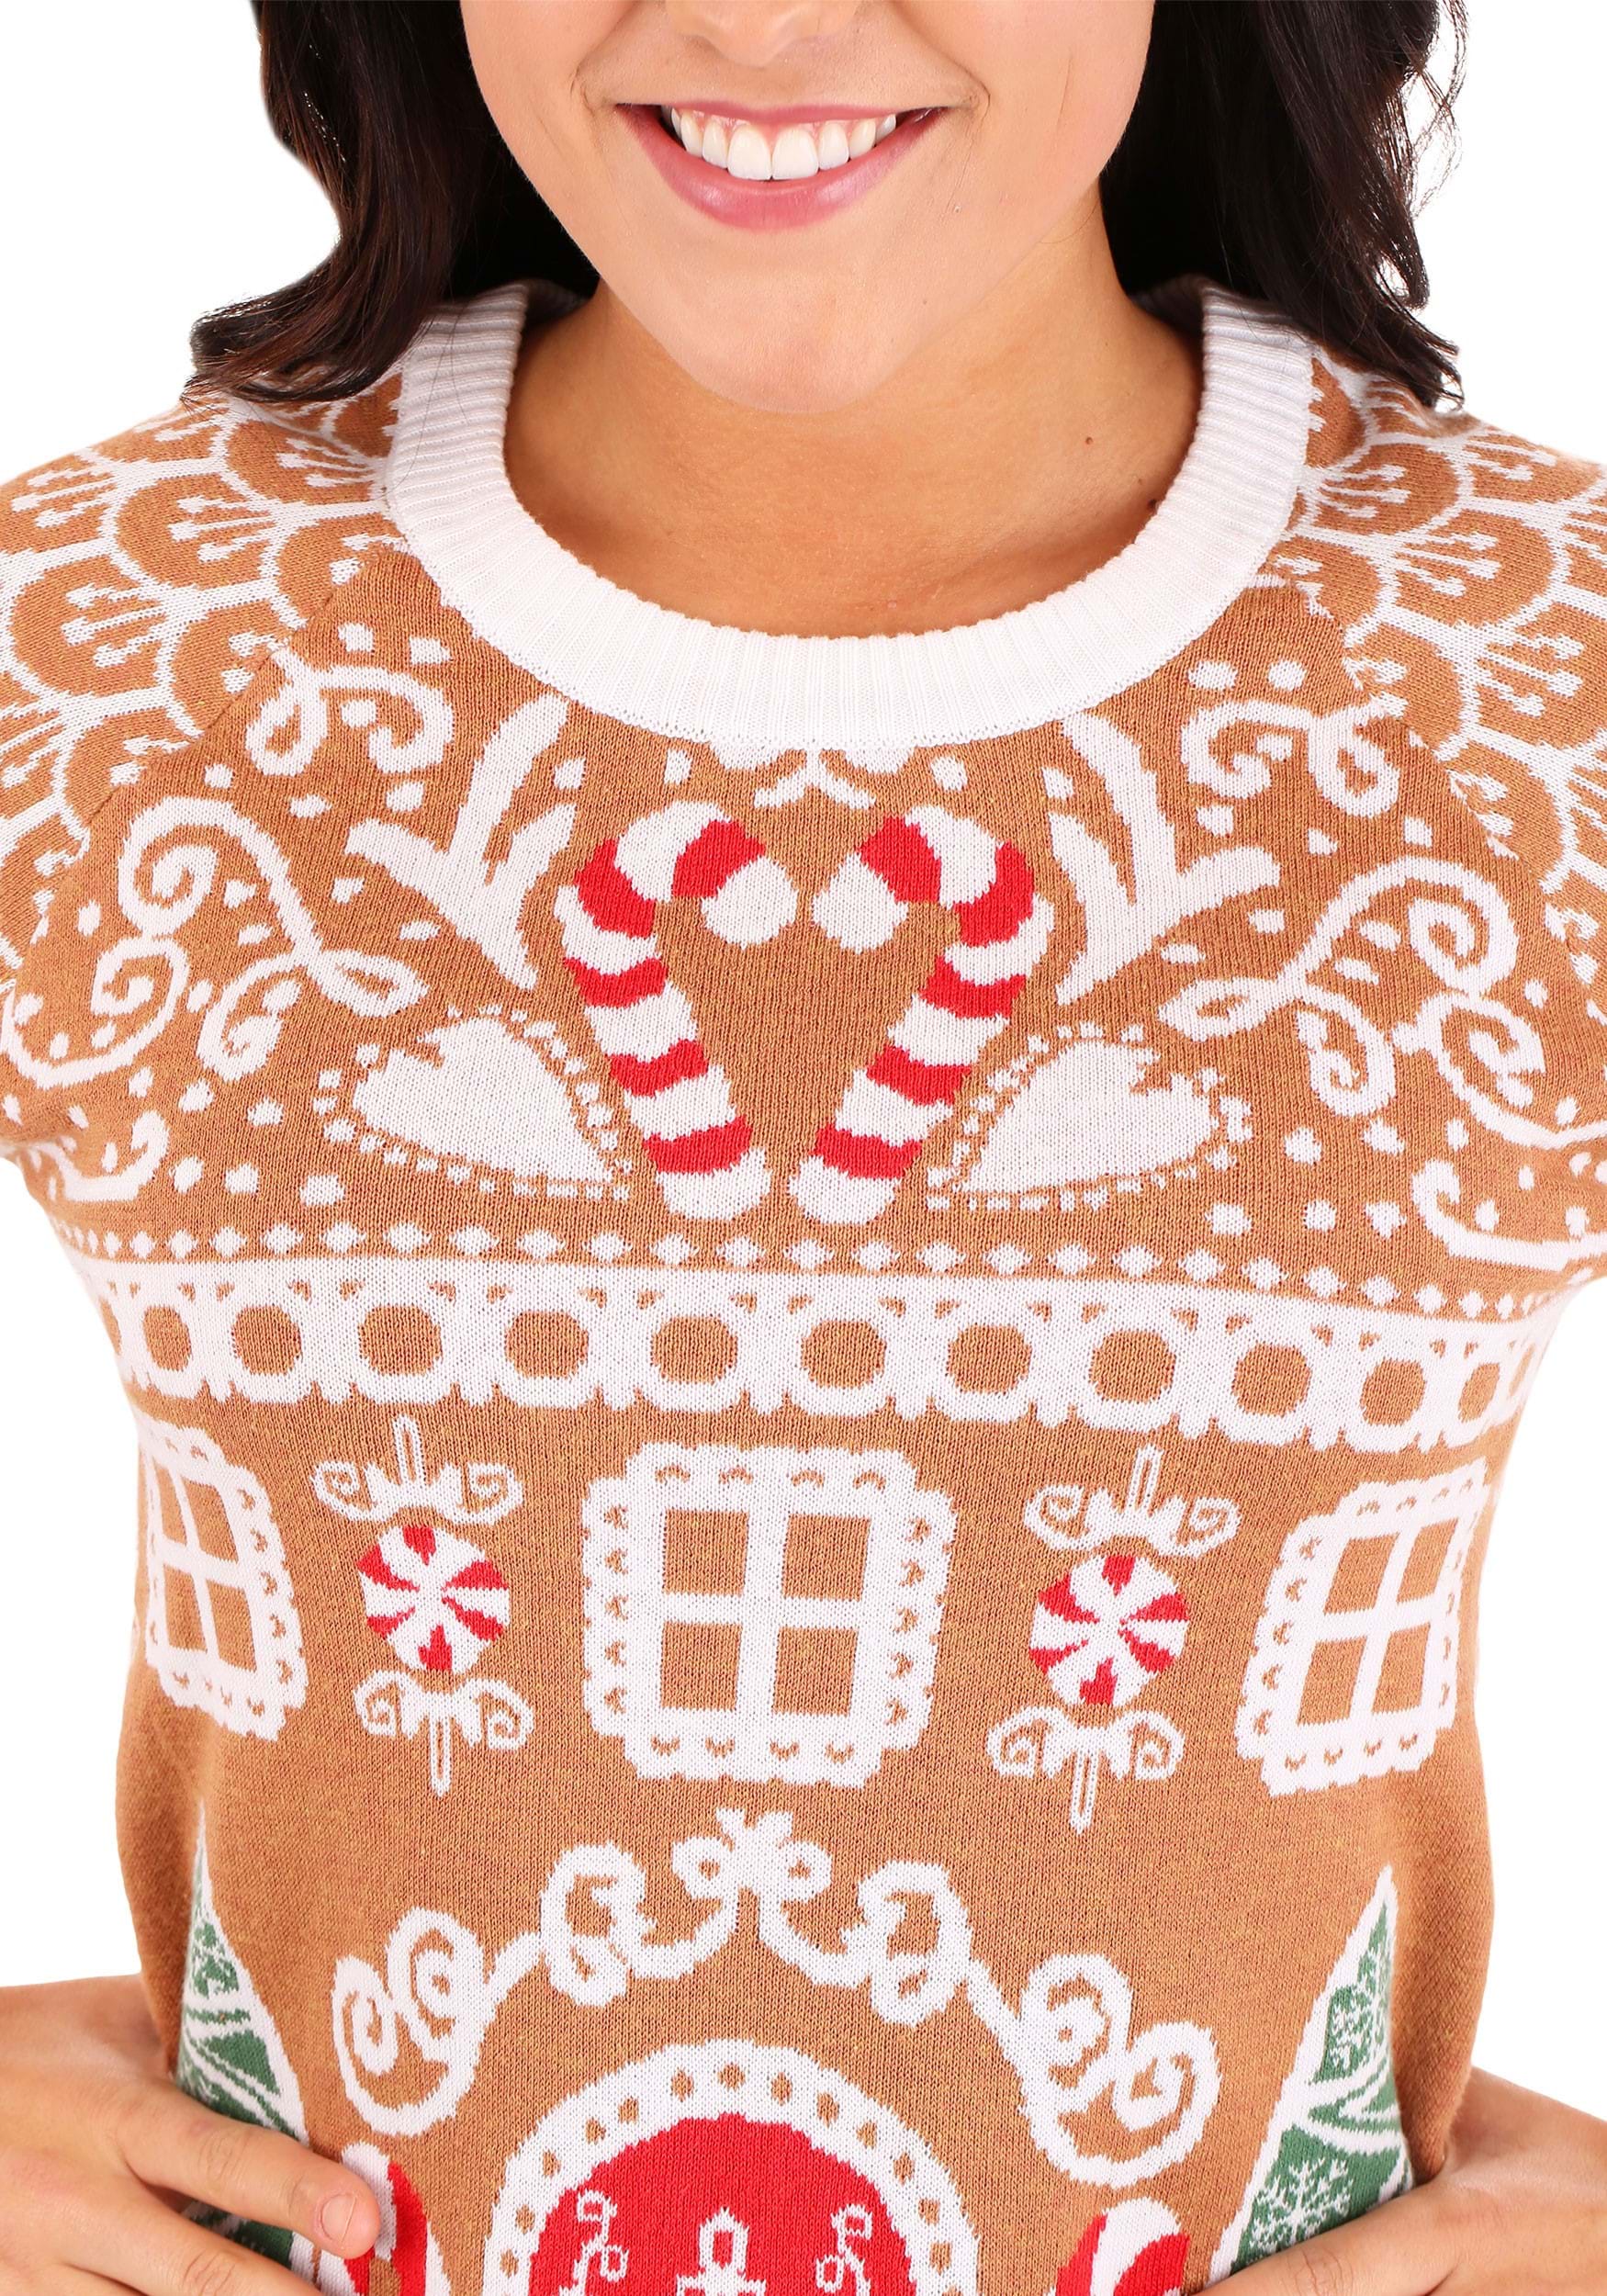 Gingerbread House Ugly Christmas Sweater For Women